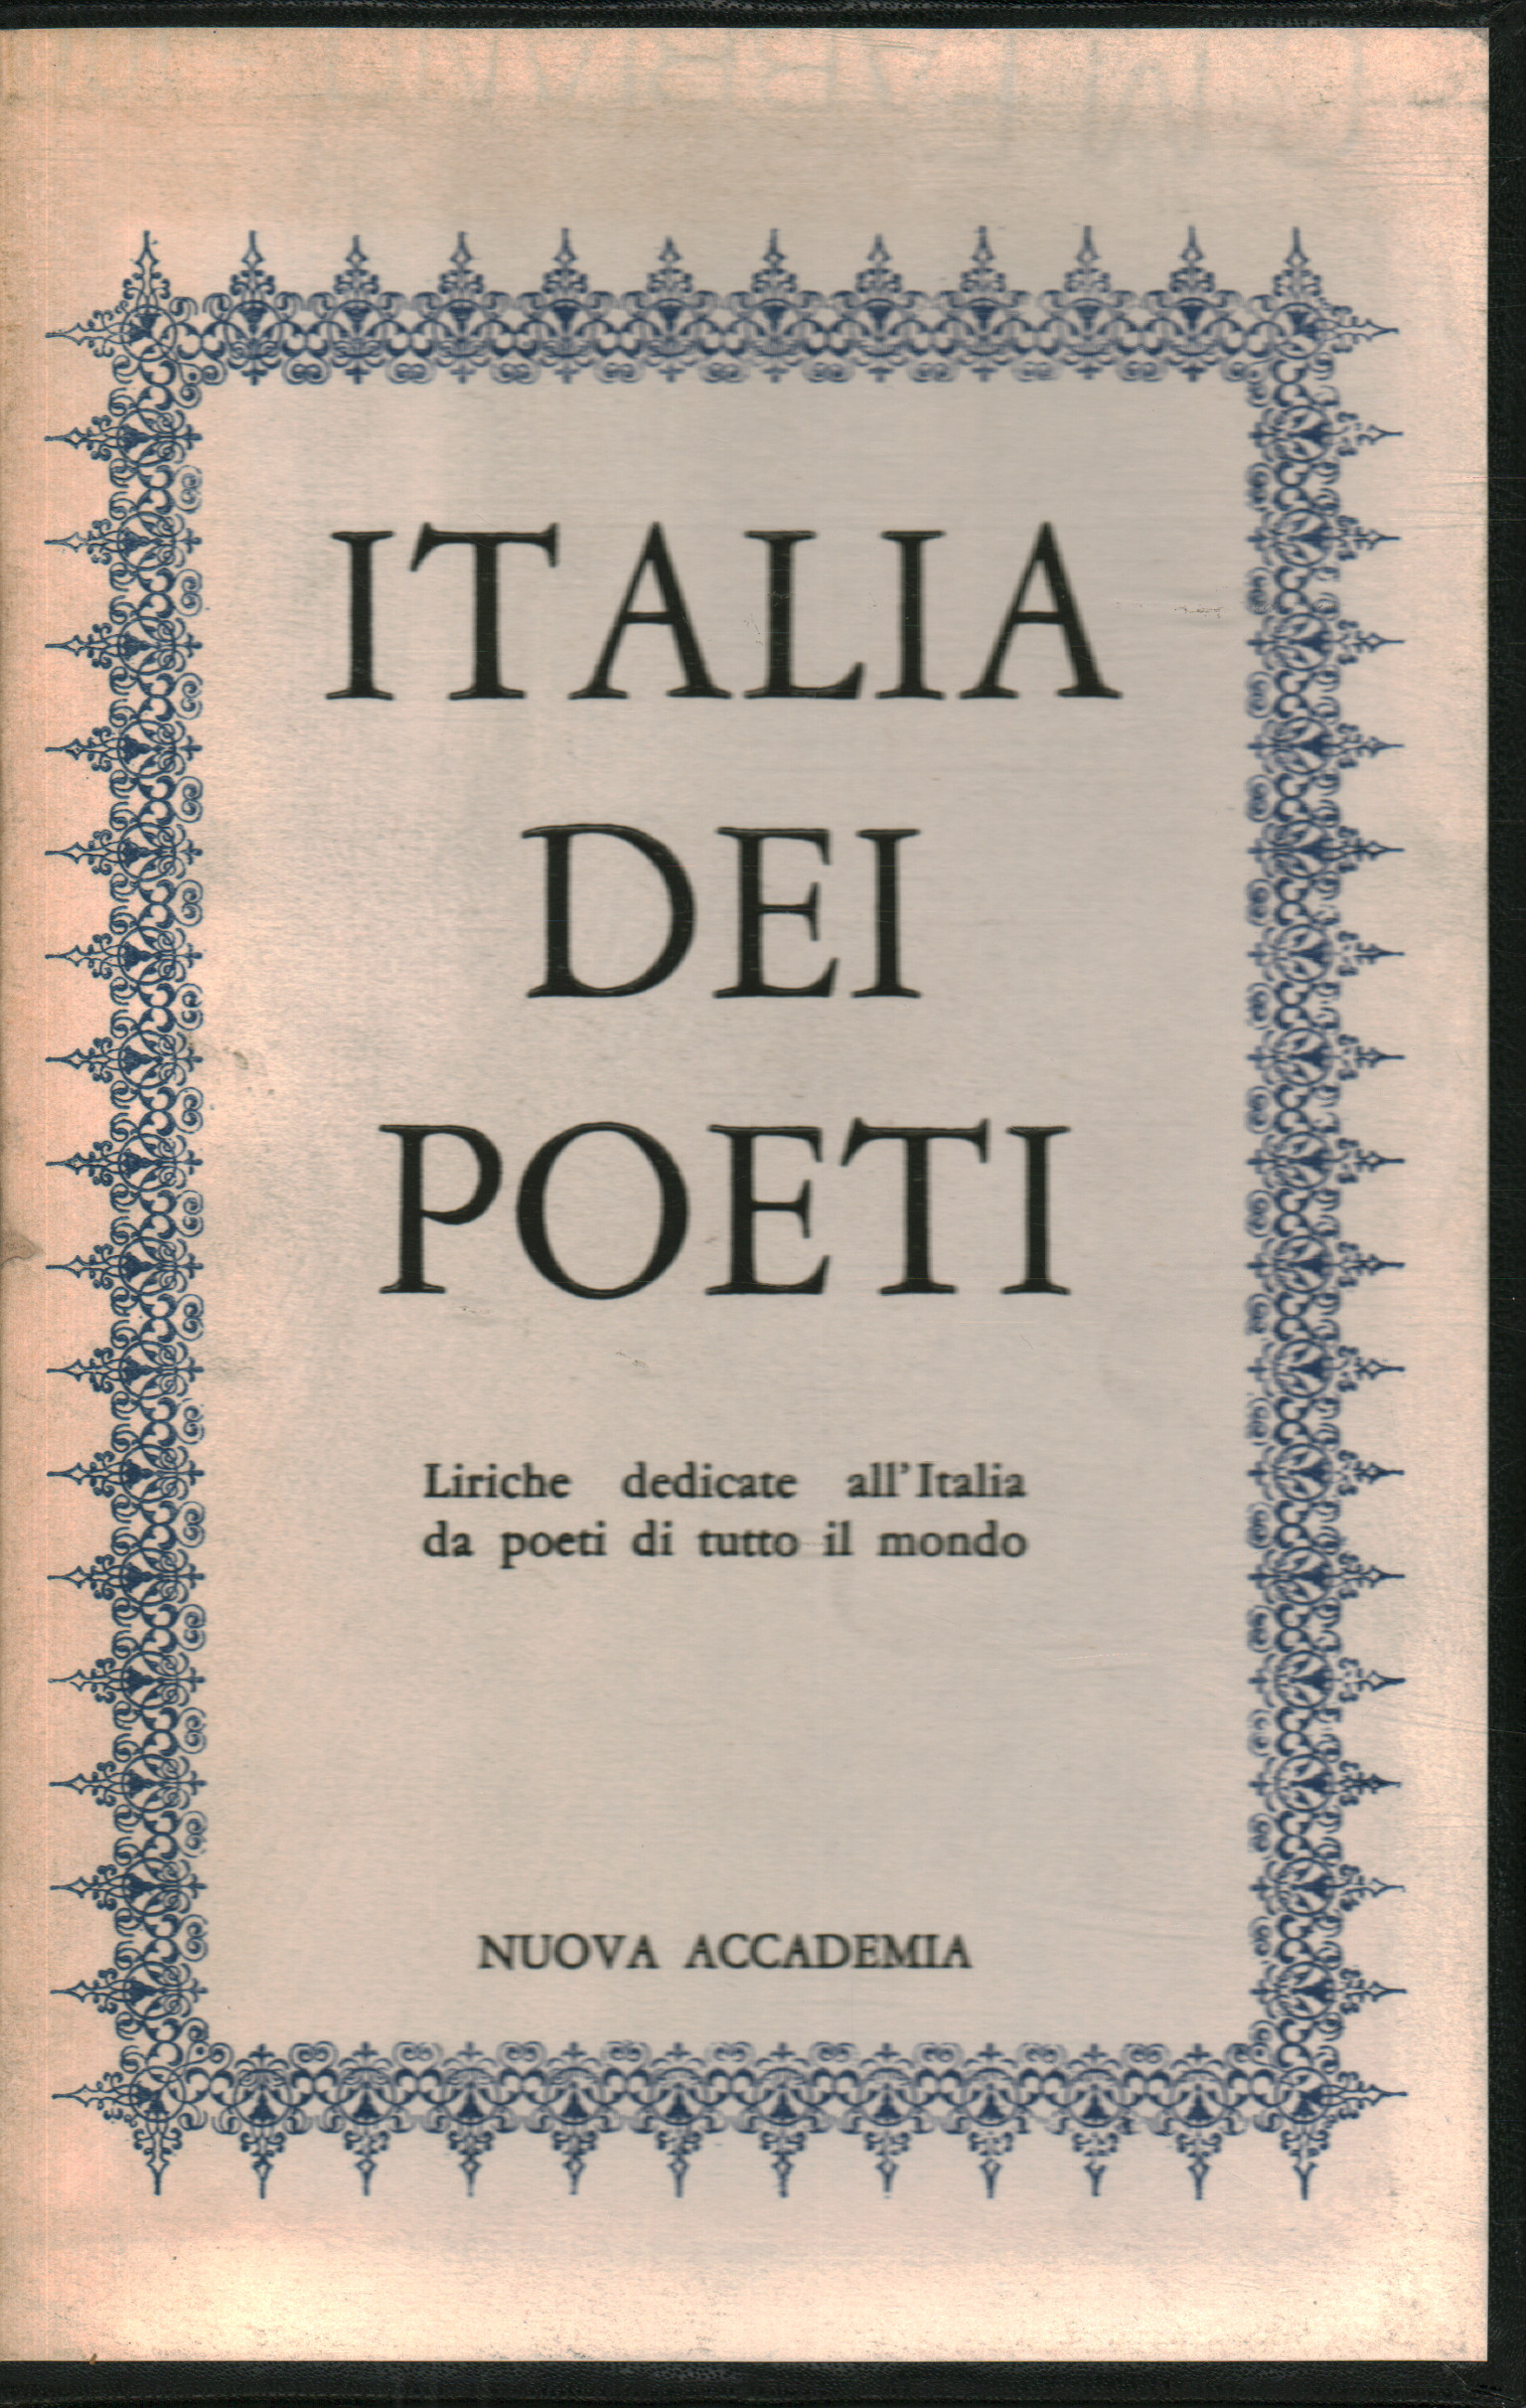 Italy of the poets, AA.VV